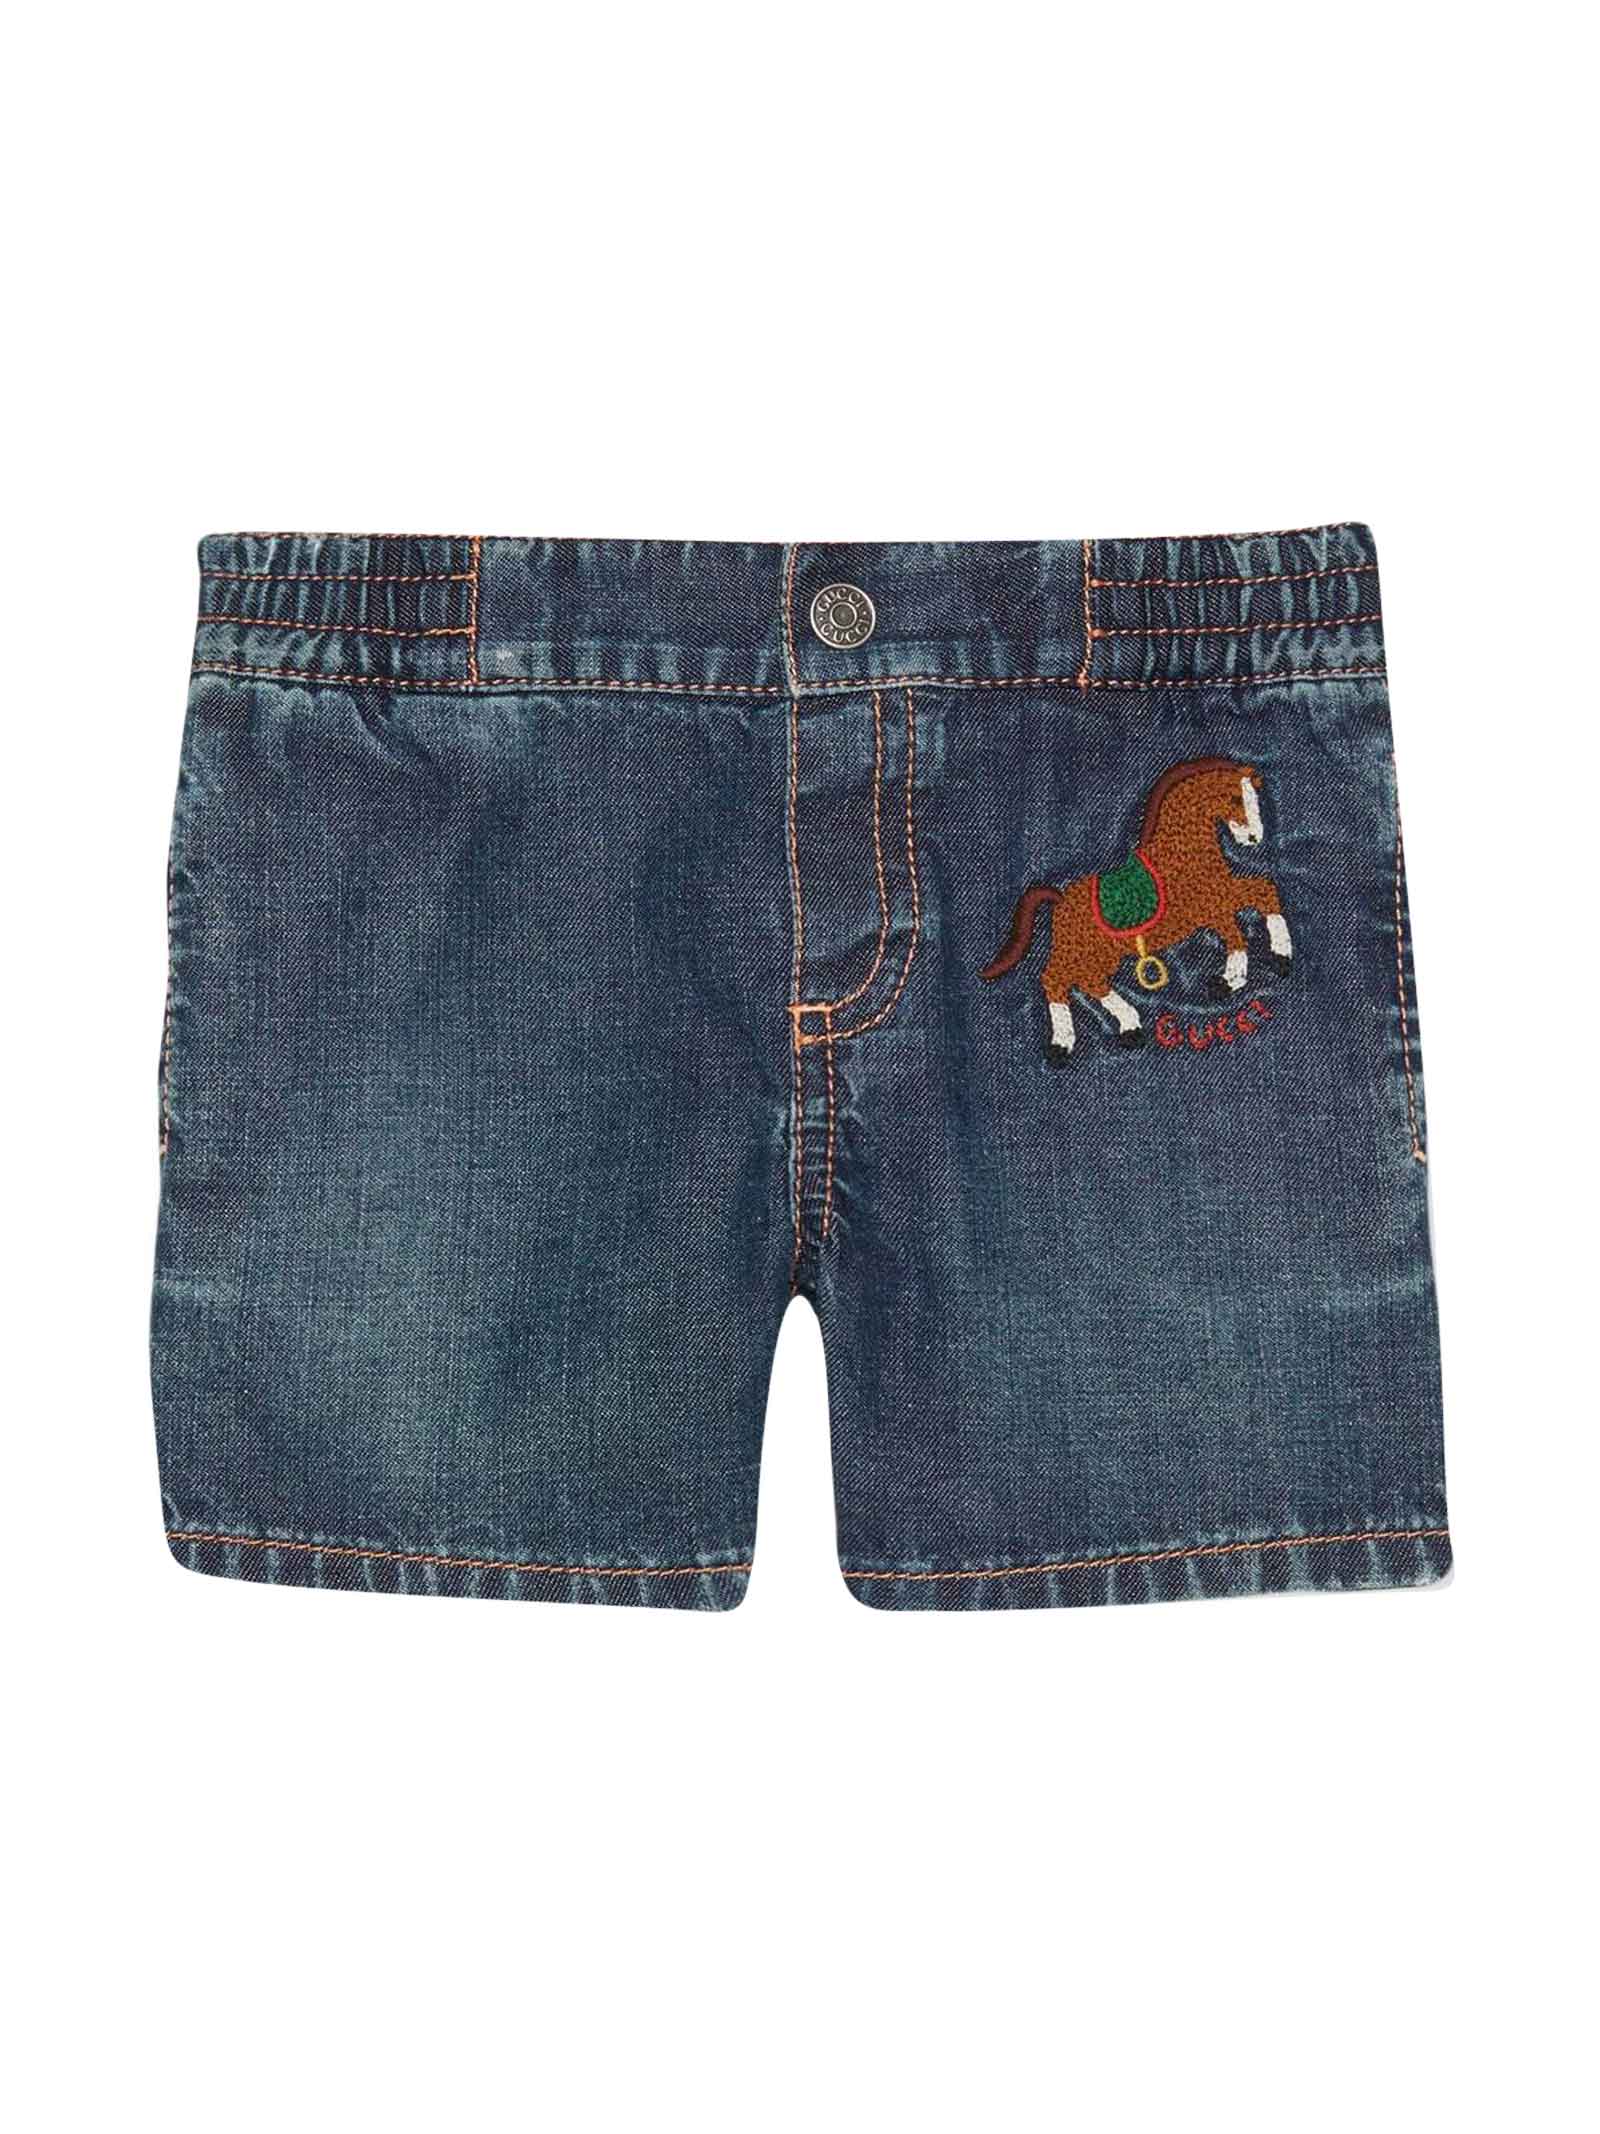 GUCCI DENIM SHORTS WITH FRONTAL APPLICATION,591306XDAZD 4206